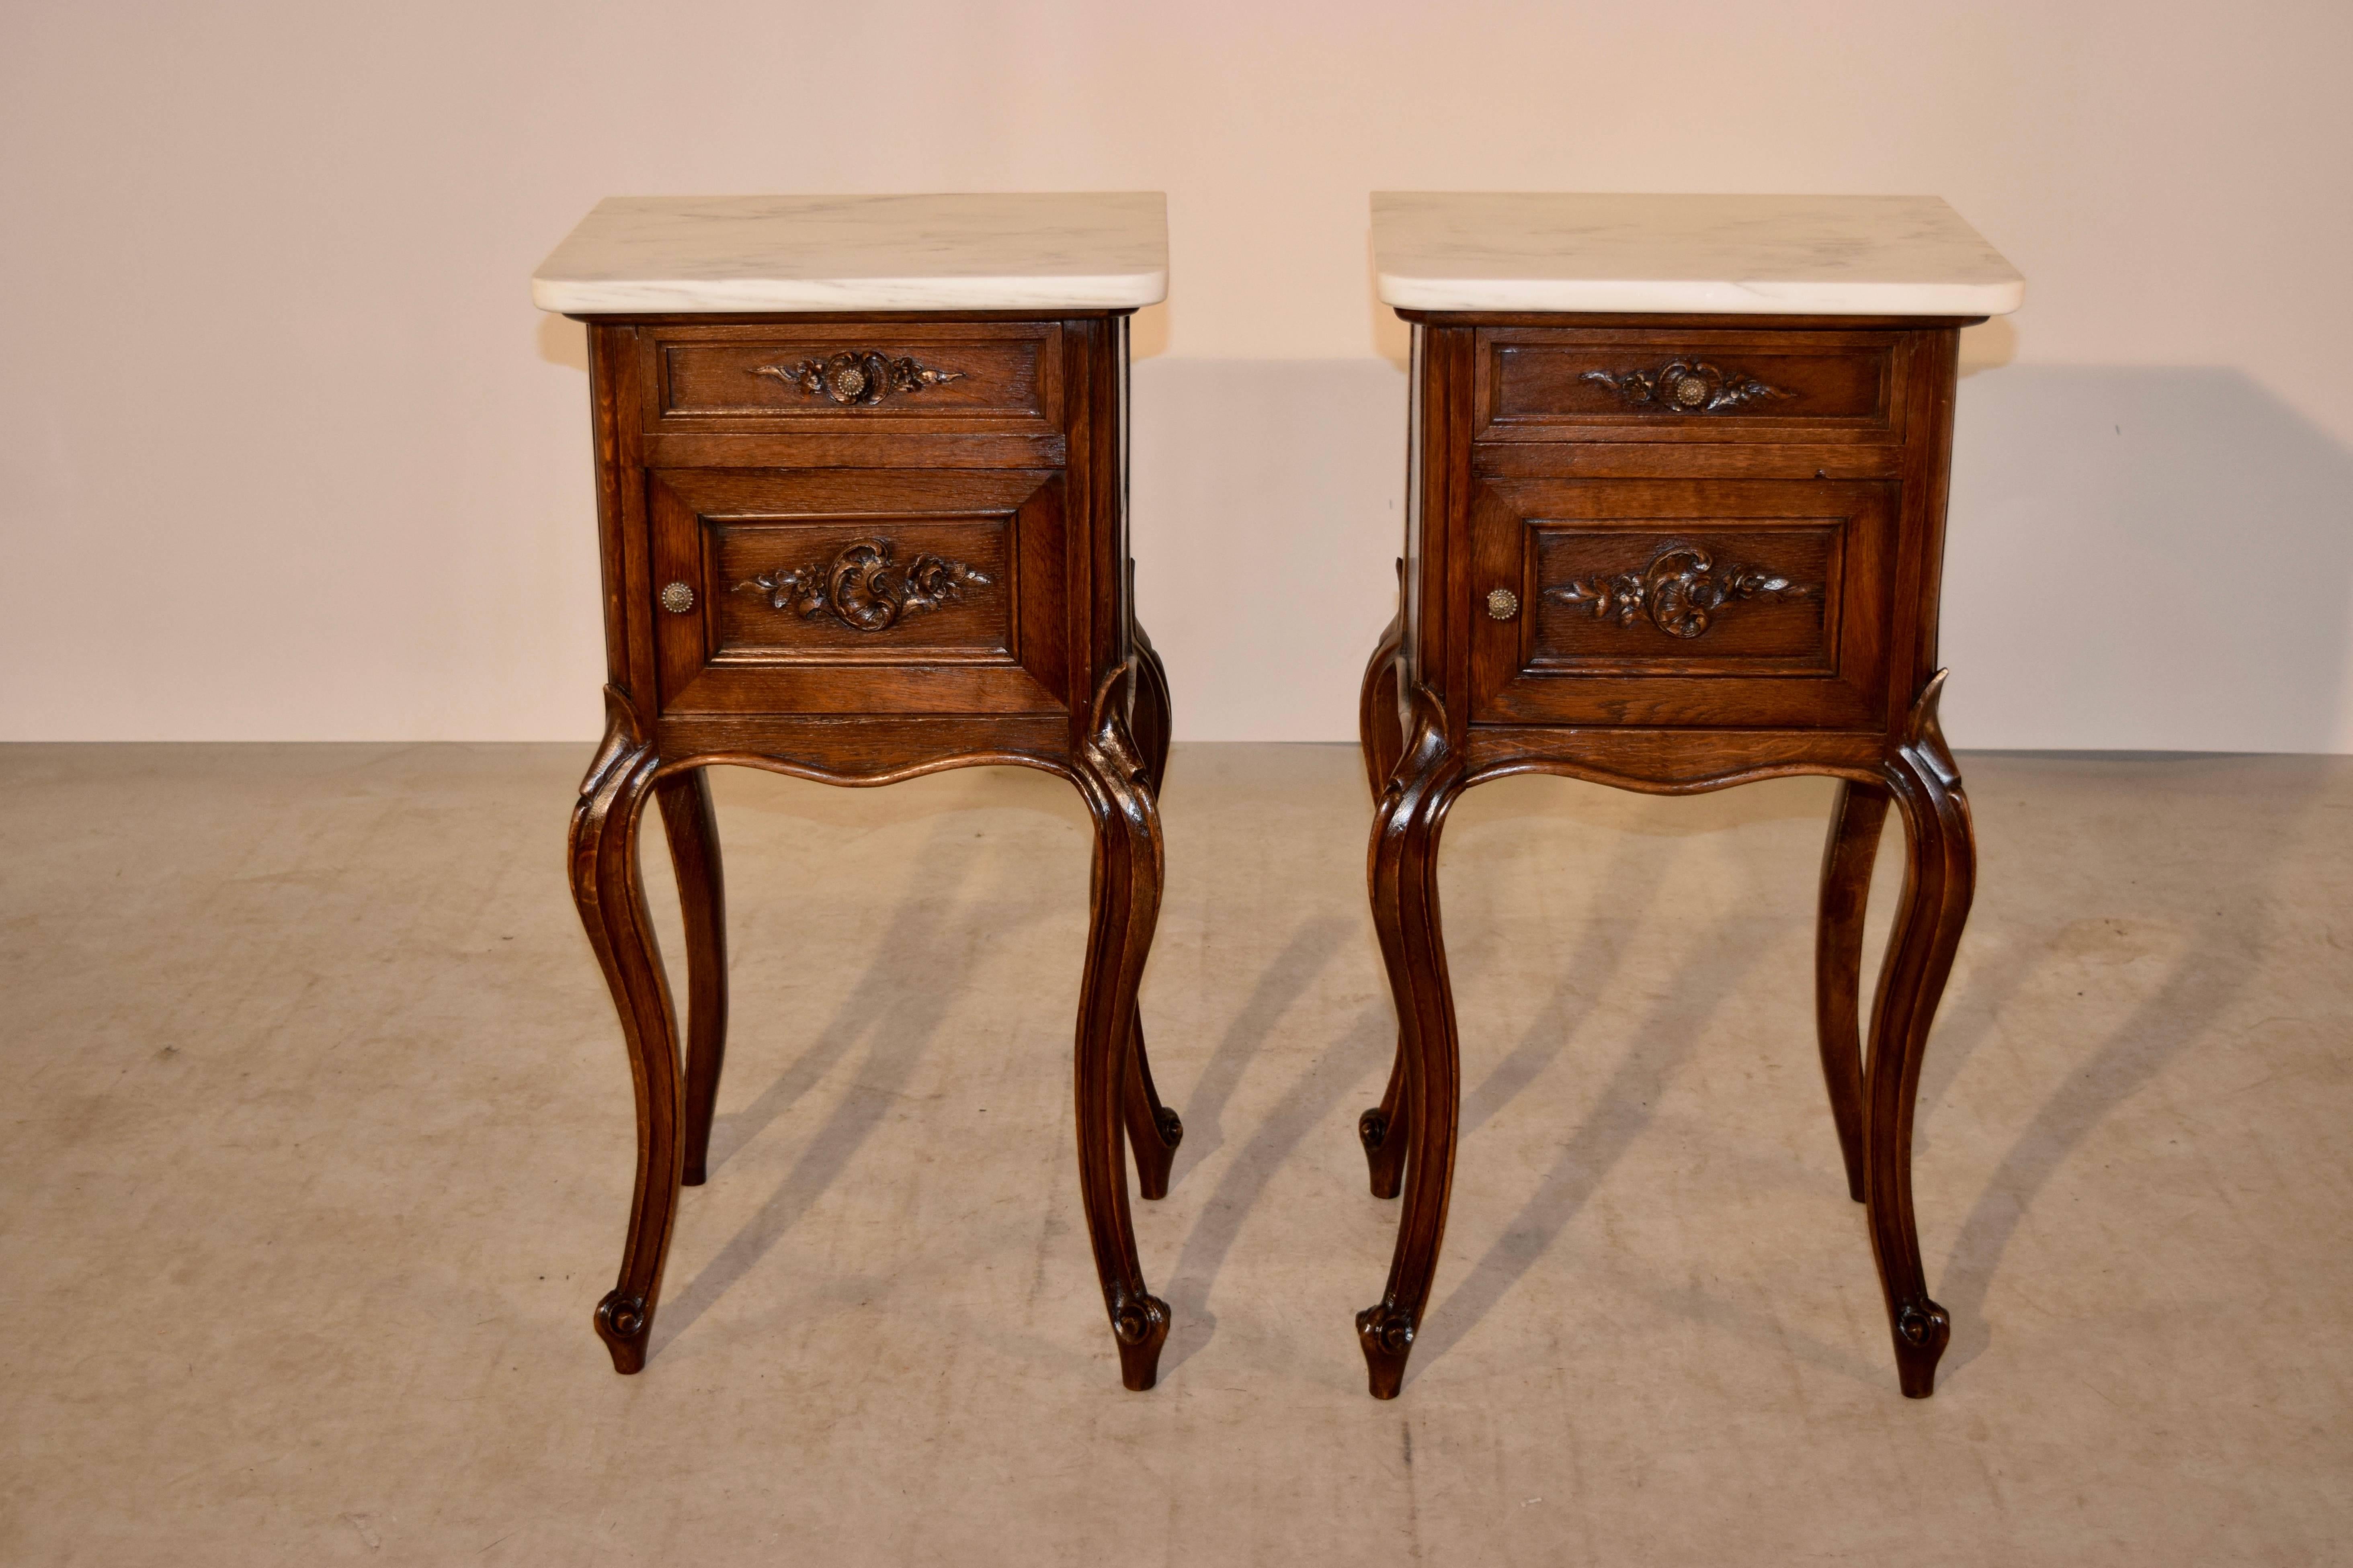 19th century pair of French bedside cabinets made from oak. The tops are marble, with nice neutral veining. There is a single drawer over a single door, which both have lovely hand-carved decoration. The aprons are scalloped on all four sides. The